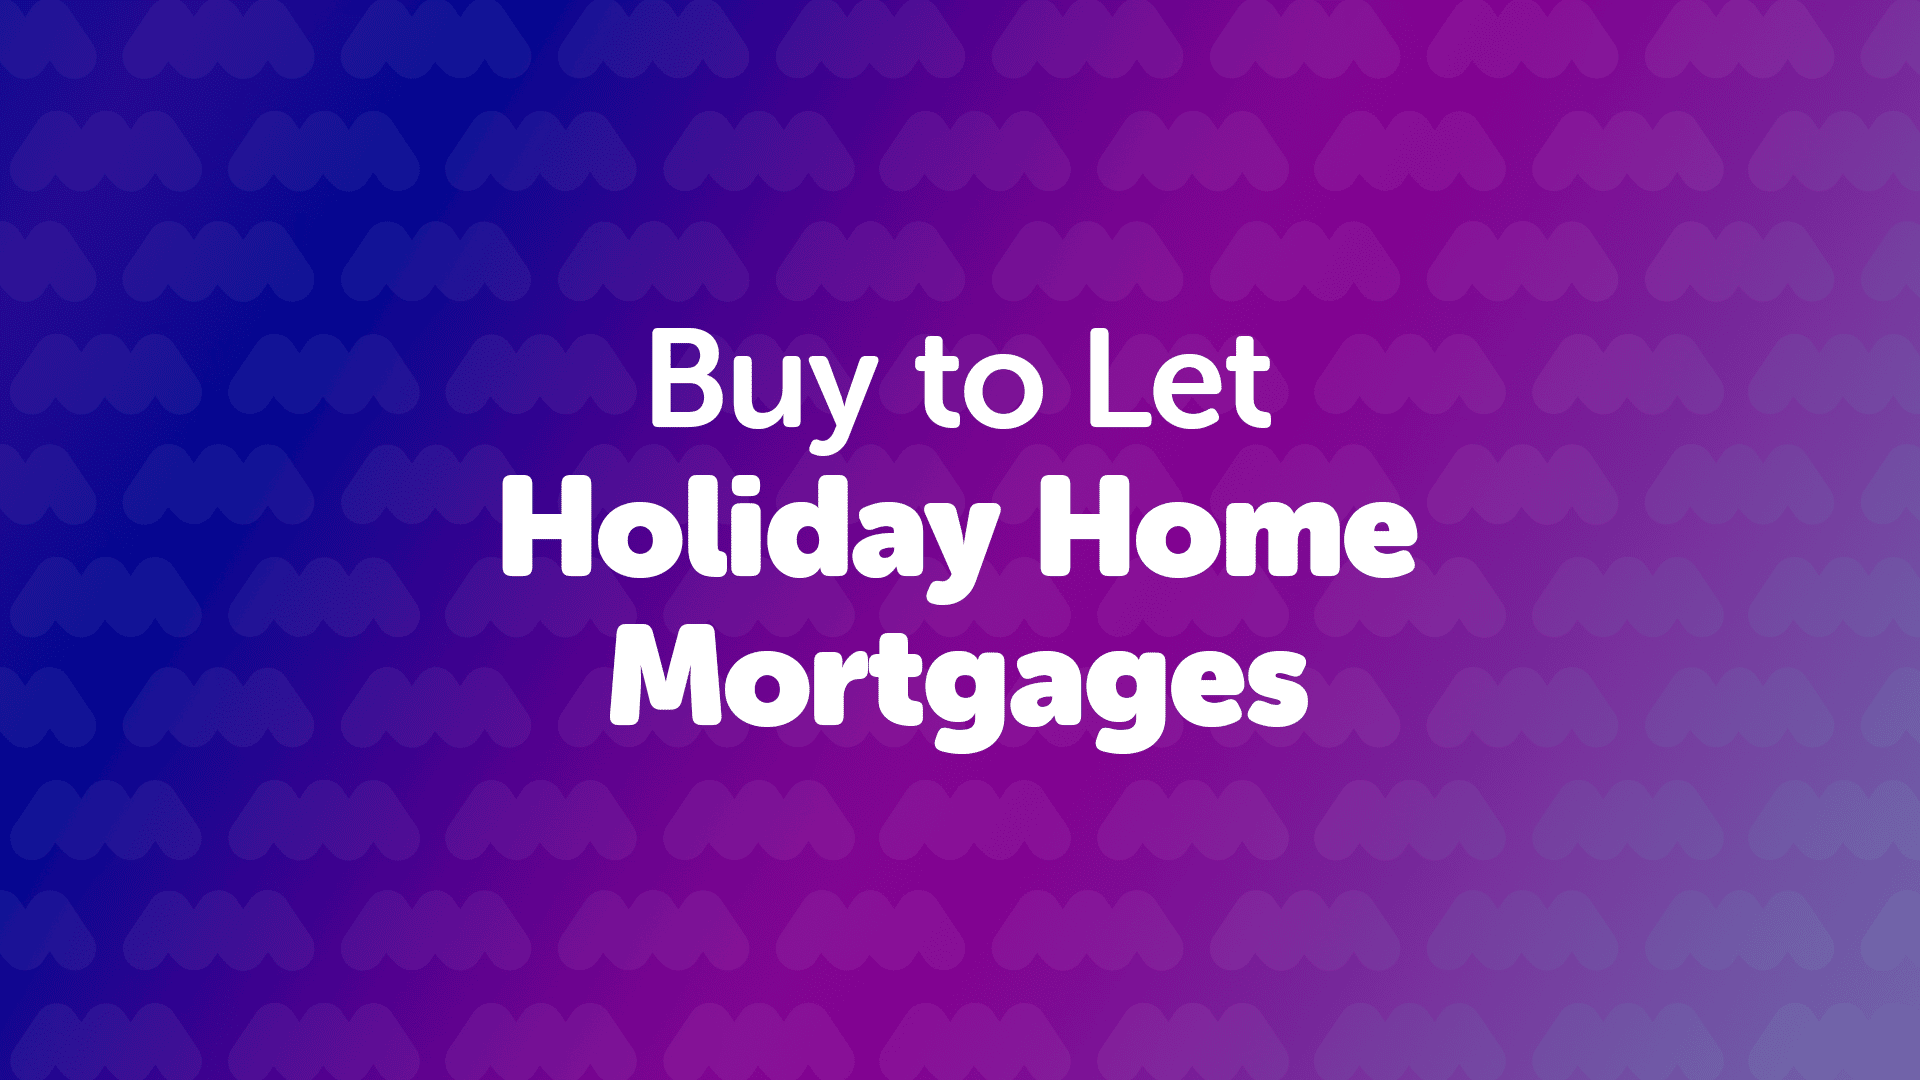 Buy to Let Holiday Home Mortgages | Holiday Let Mortgages | Buy to Let Mortgages | UK Moneyman